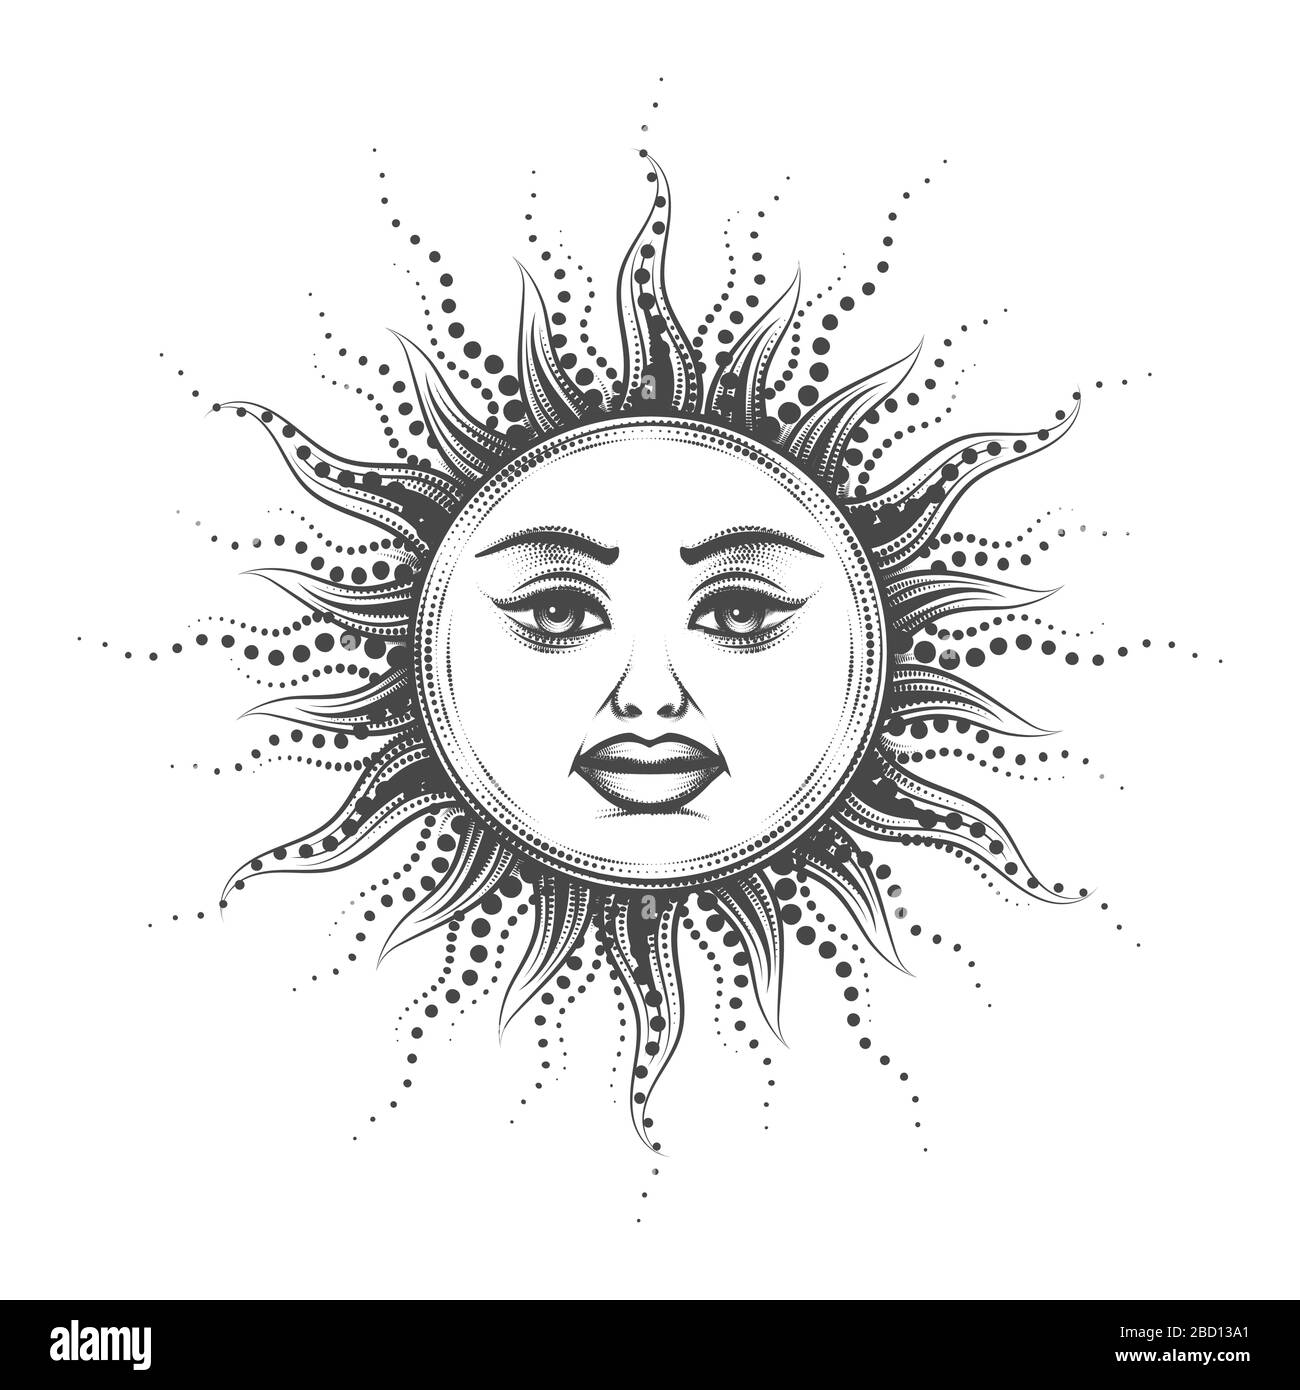 Medieval Esoteric Emblem of Sun with Human face Drawn in Vintage Engraving Style. Vector illustration. Stock Vector